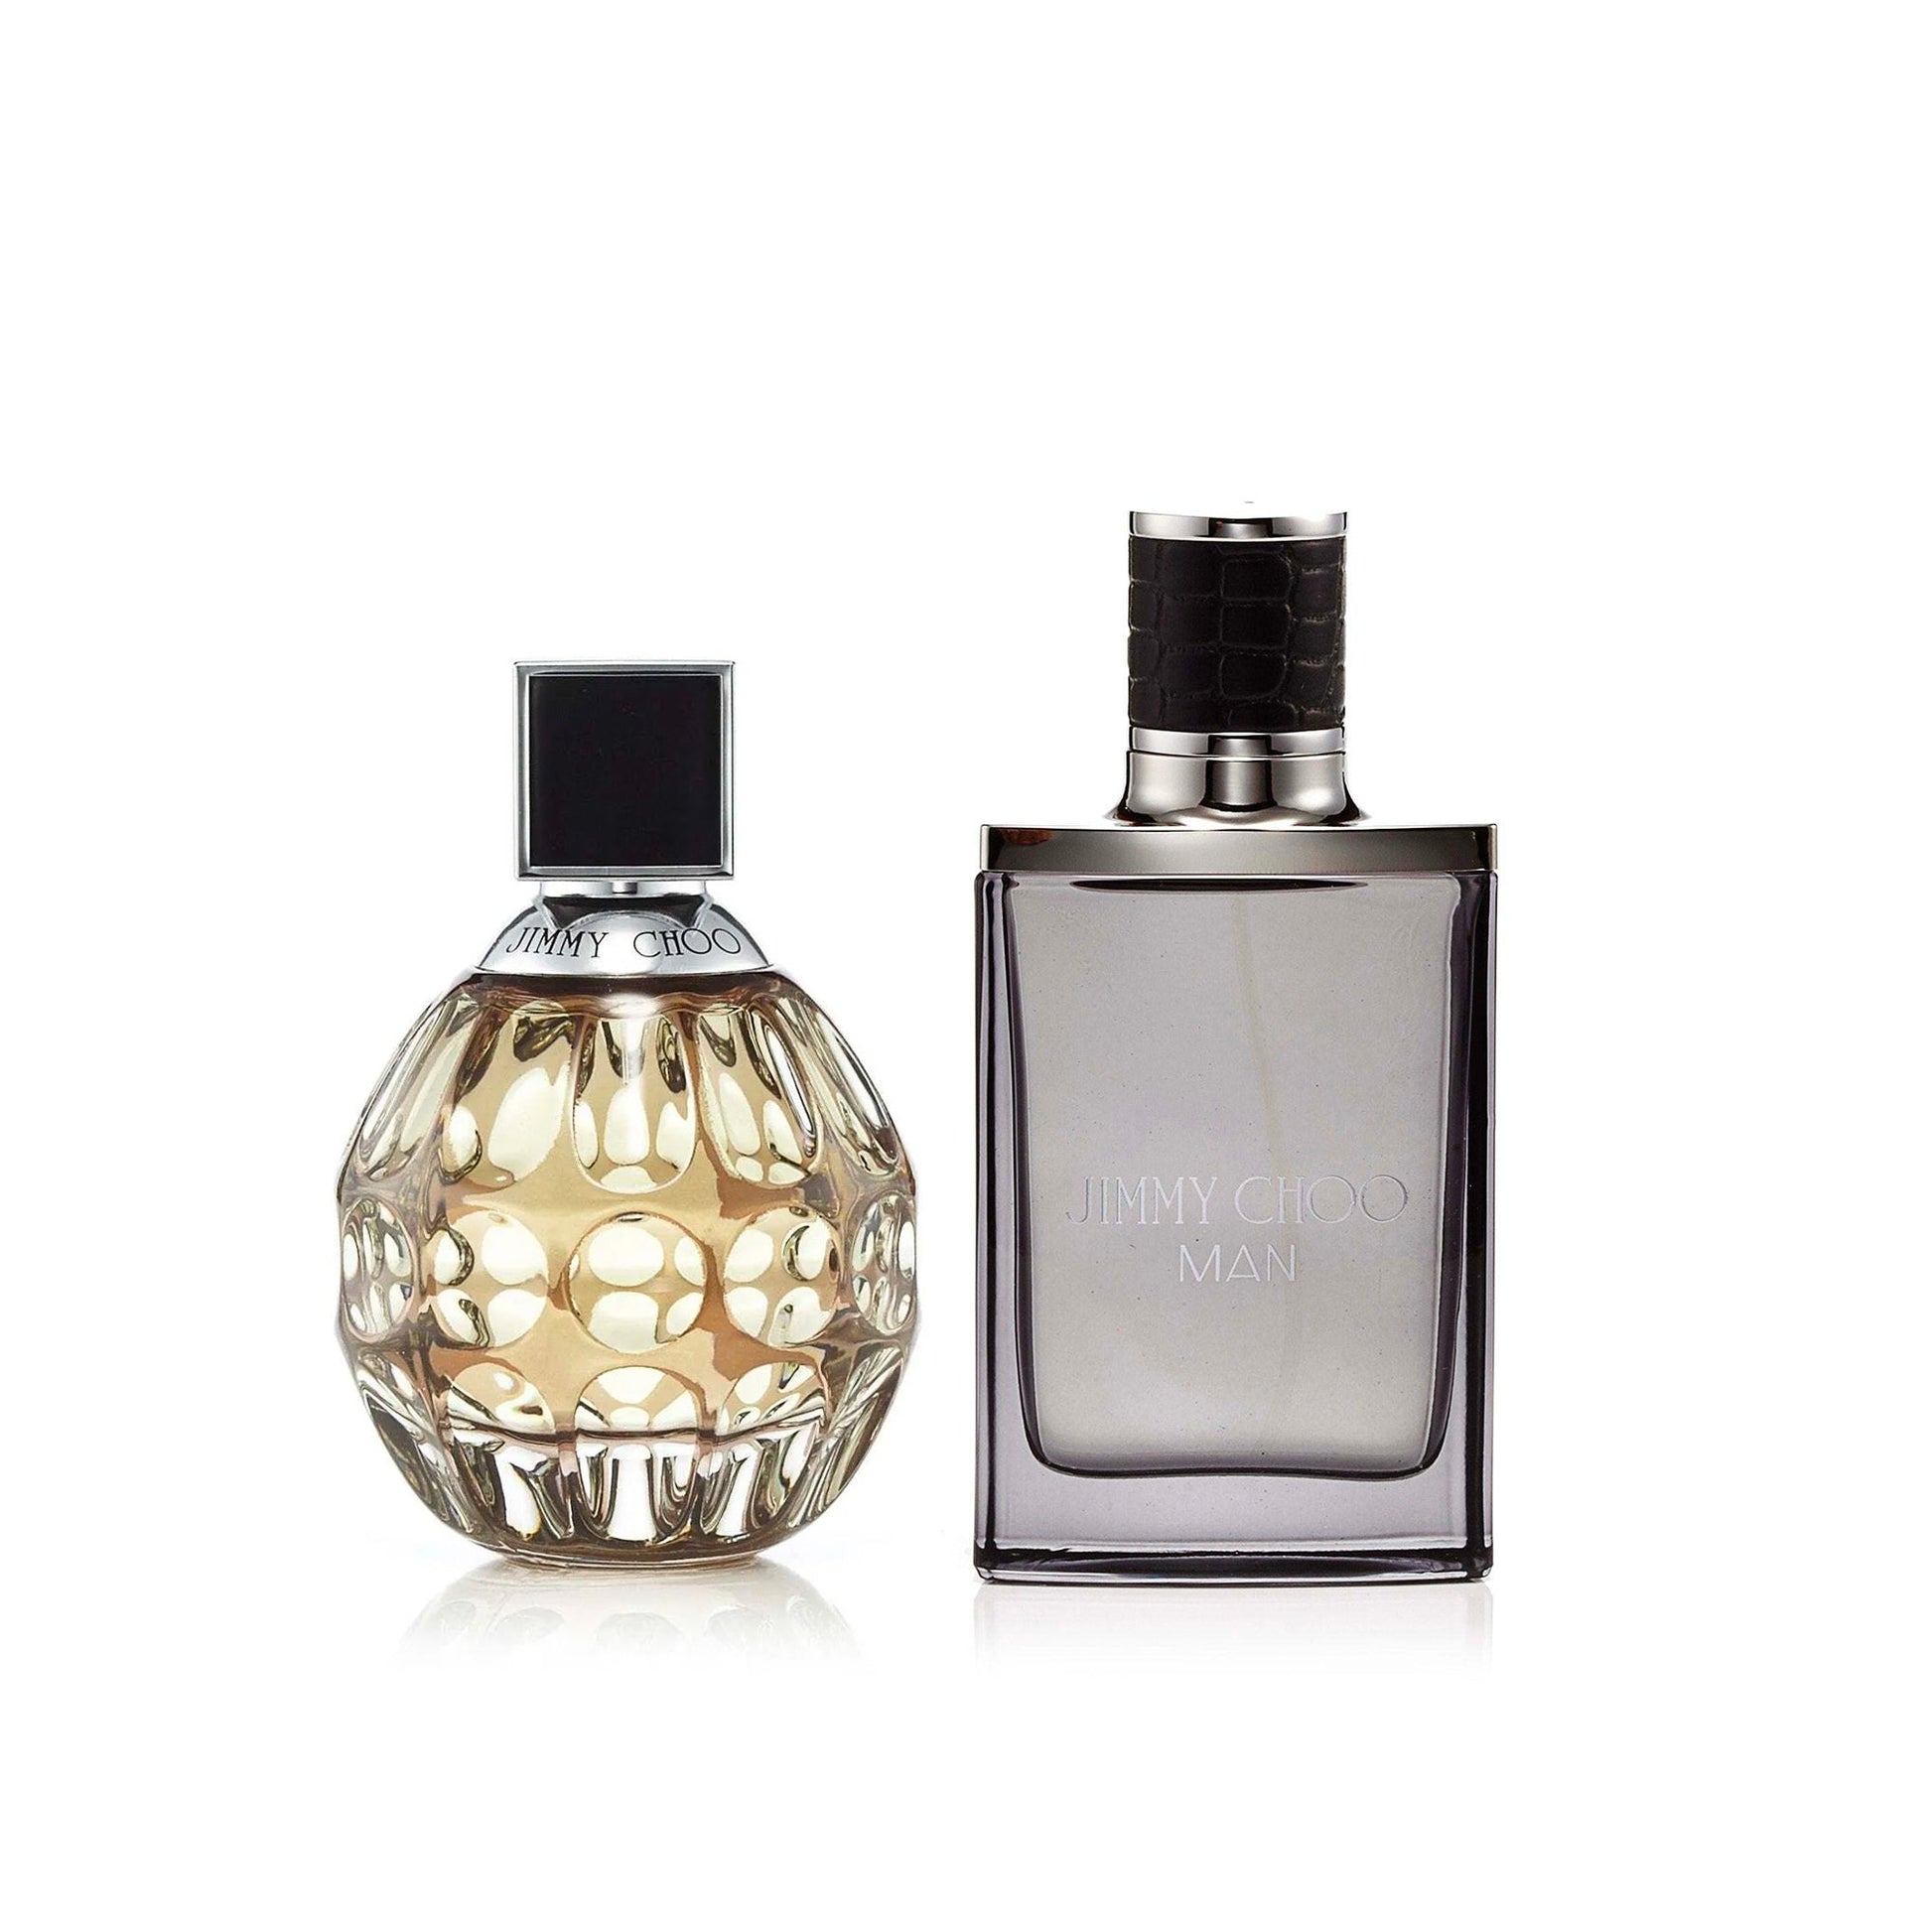 Bundle Deal His & Hers: Jimmy Choo by Jimmy Choo for Men and Women, Product image 1